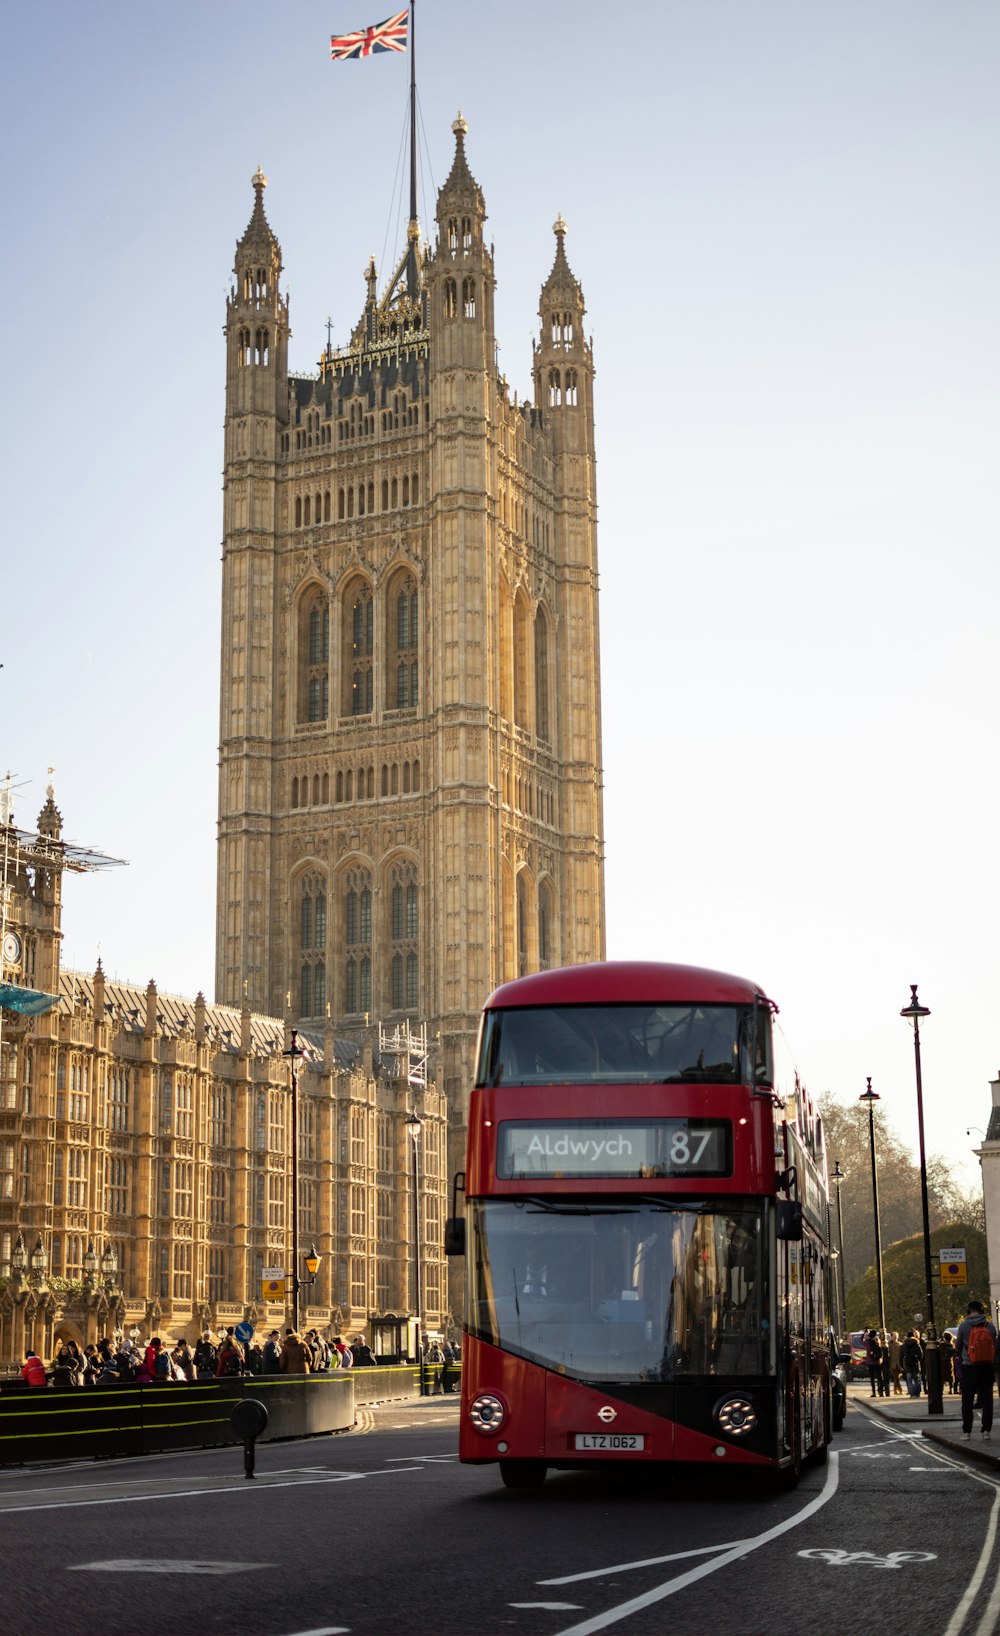 a double decker bus in front of a large building